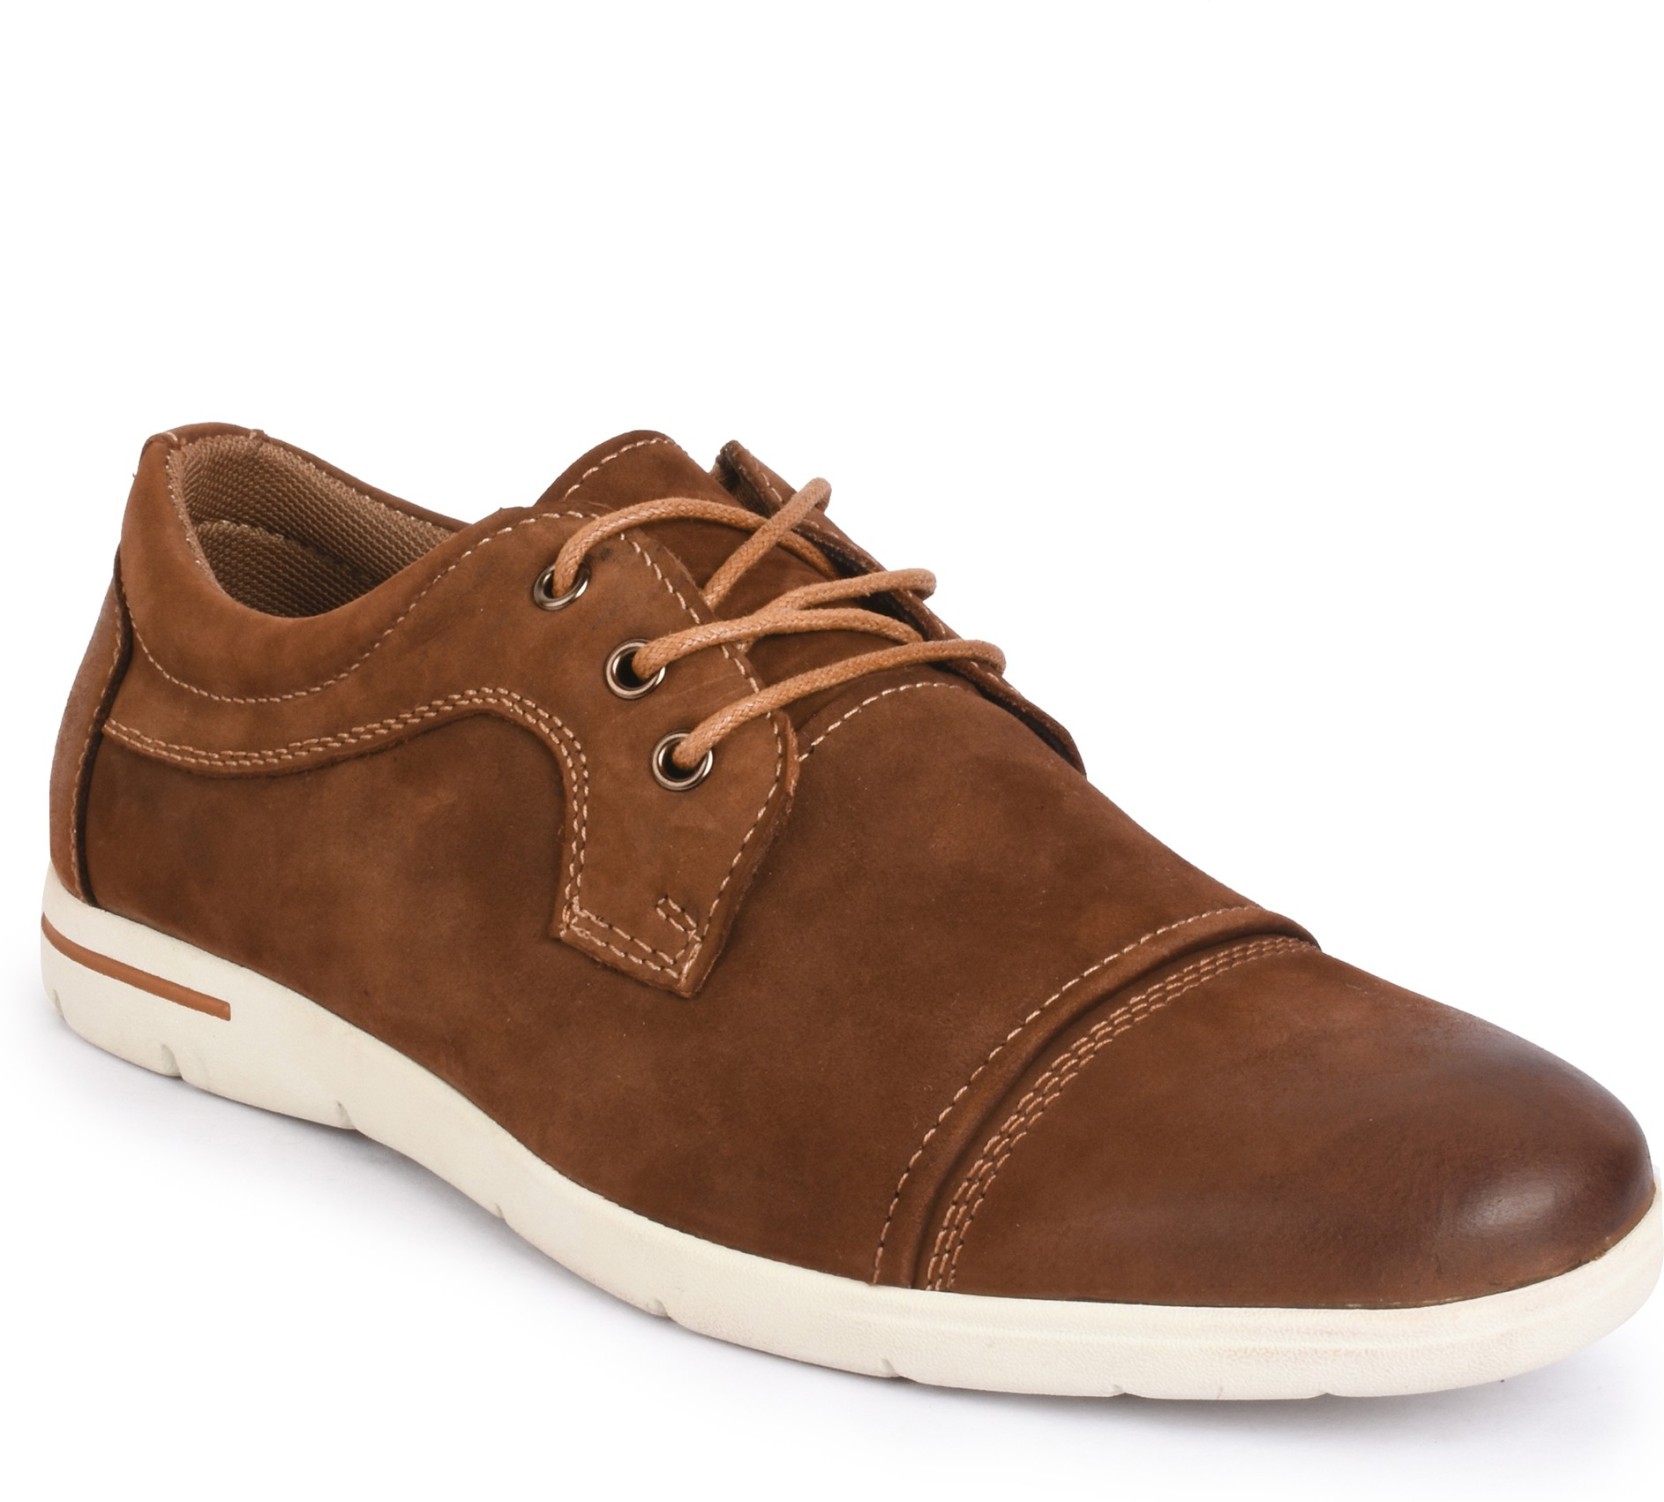 Action Shoes Casuals - Buy NL-2513-TAN Color Action Shoes Casuals ...